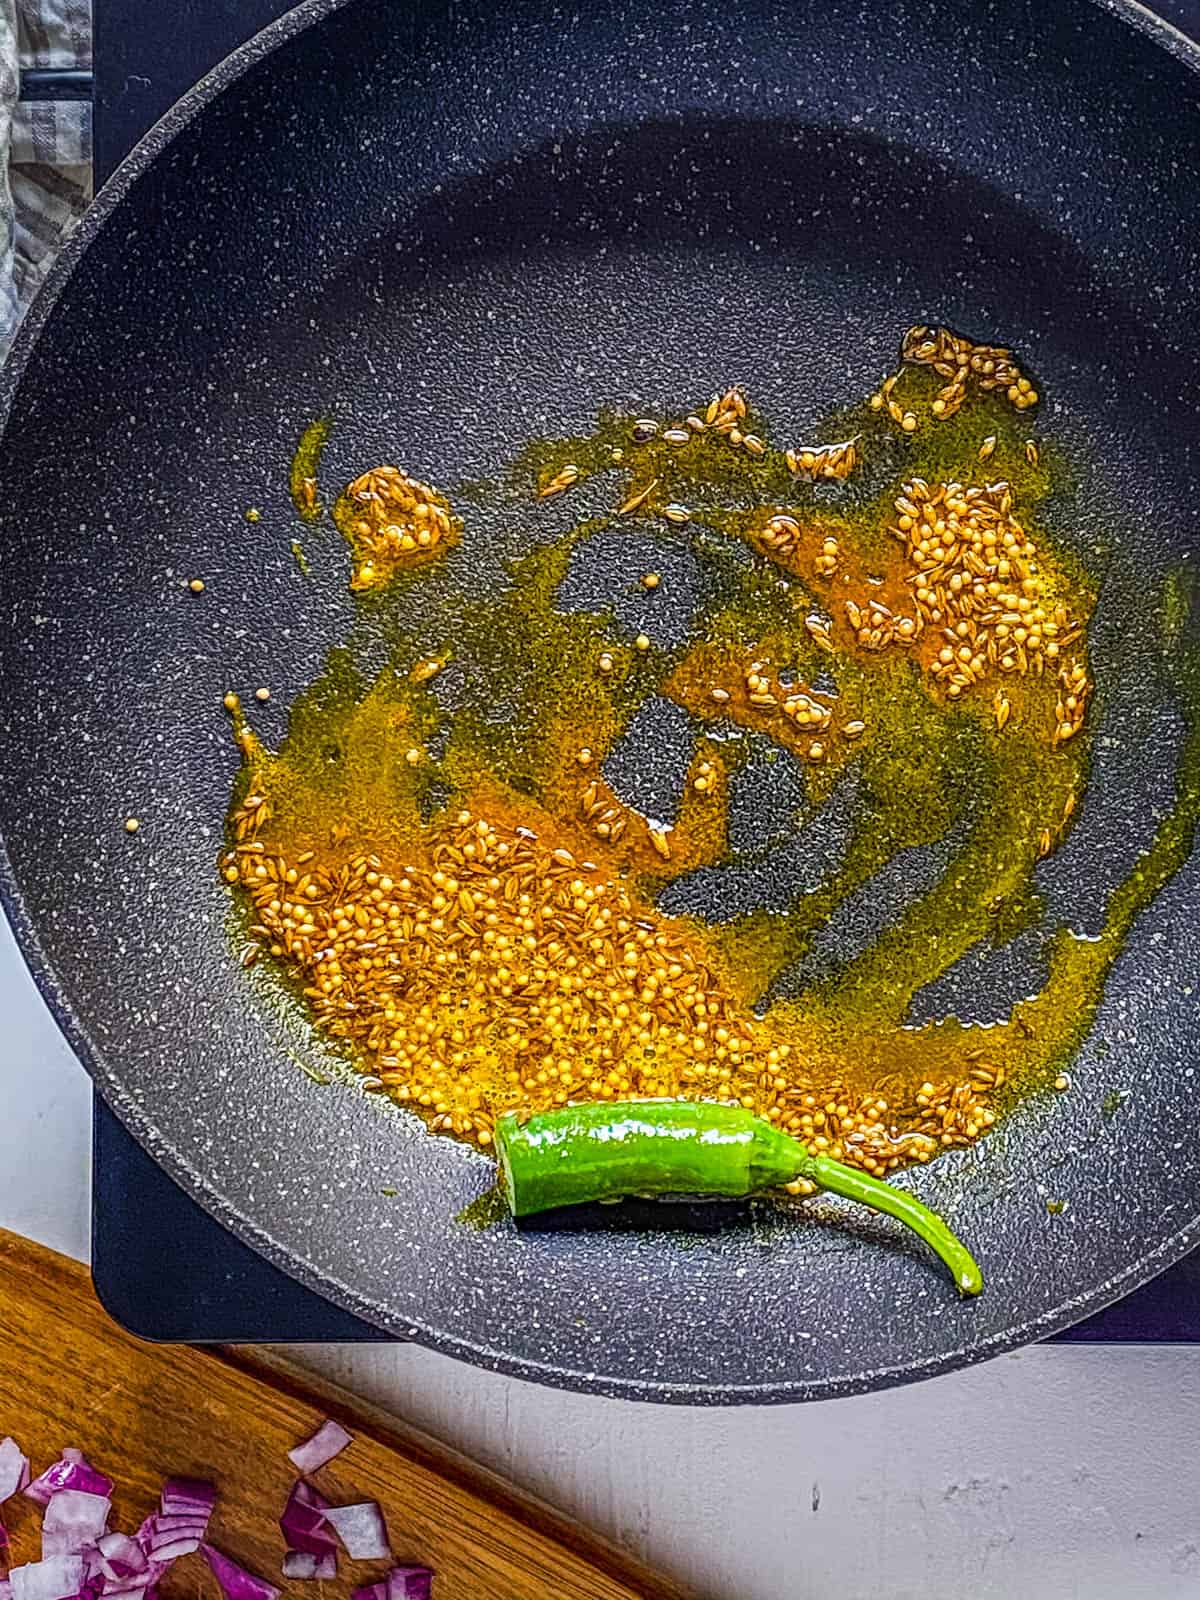 Chiles and Indian spices sauteeing in a pan on the stove.